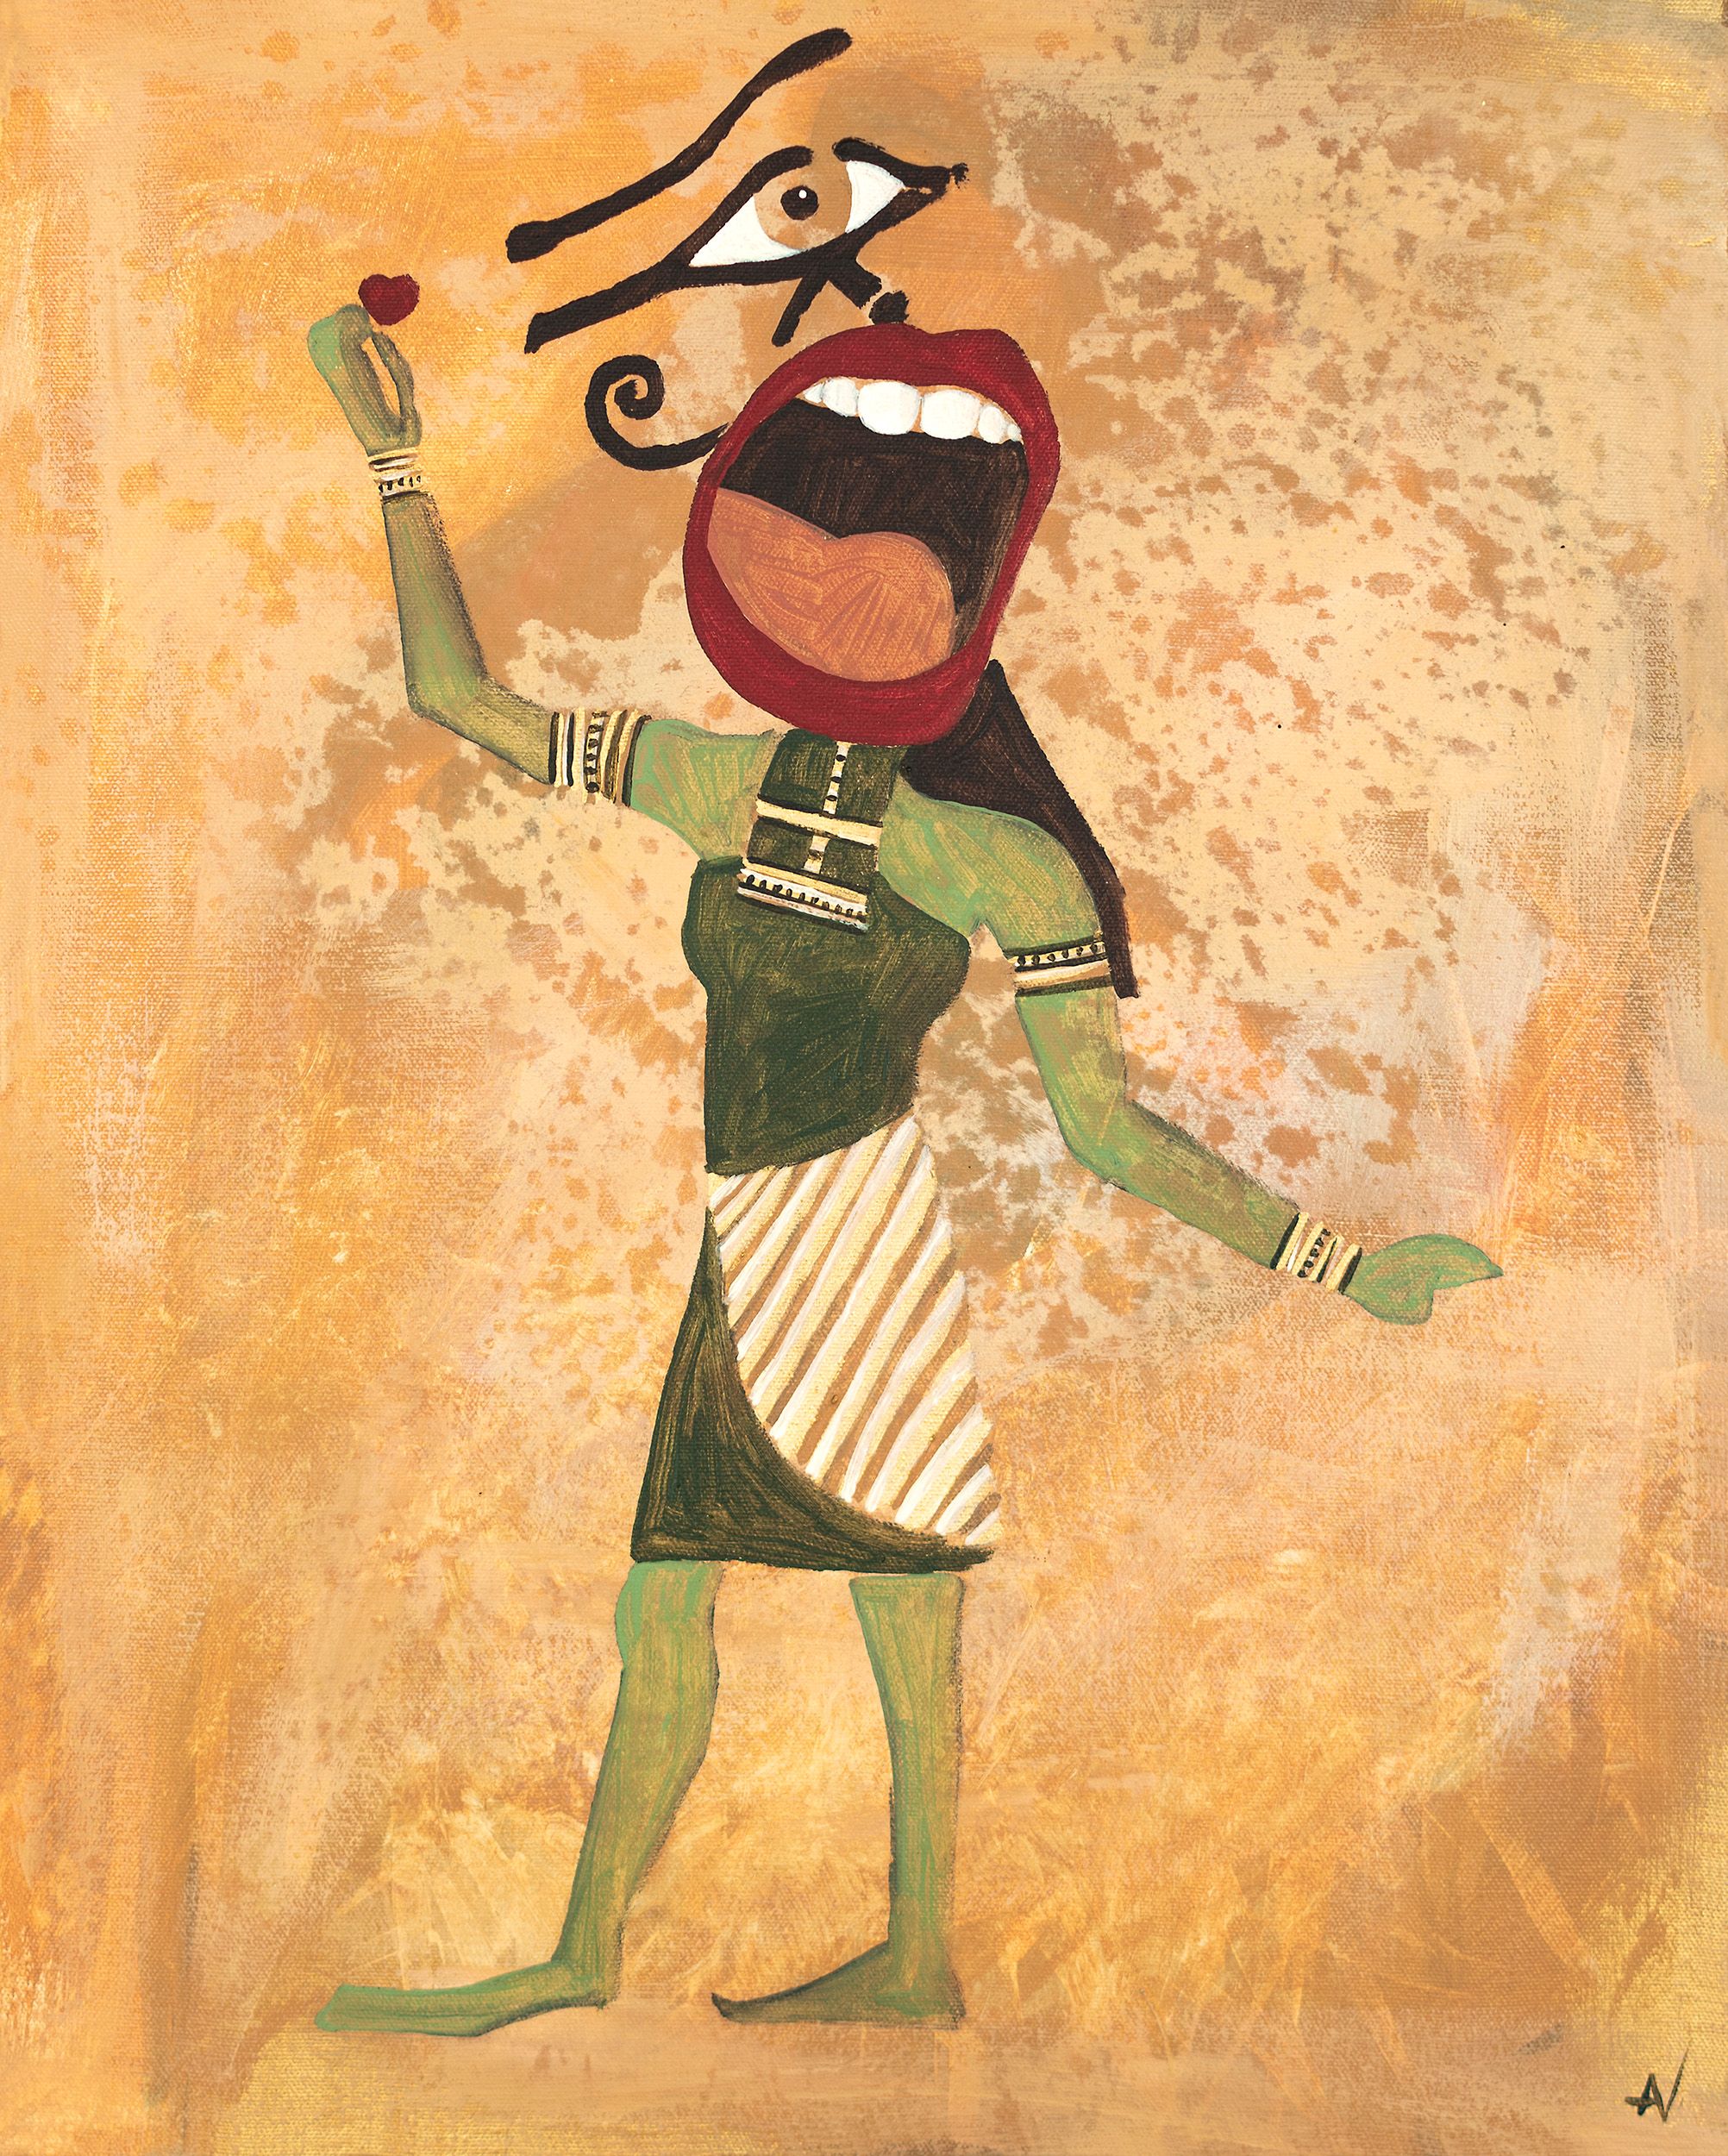 Painting of a green woman on ochre background in ancient Egyptian style shouting while holding a small red heart in her hand.